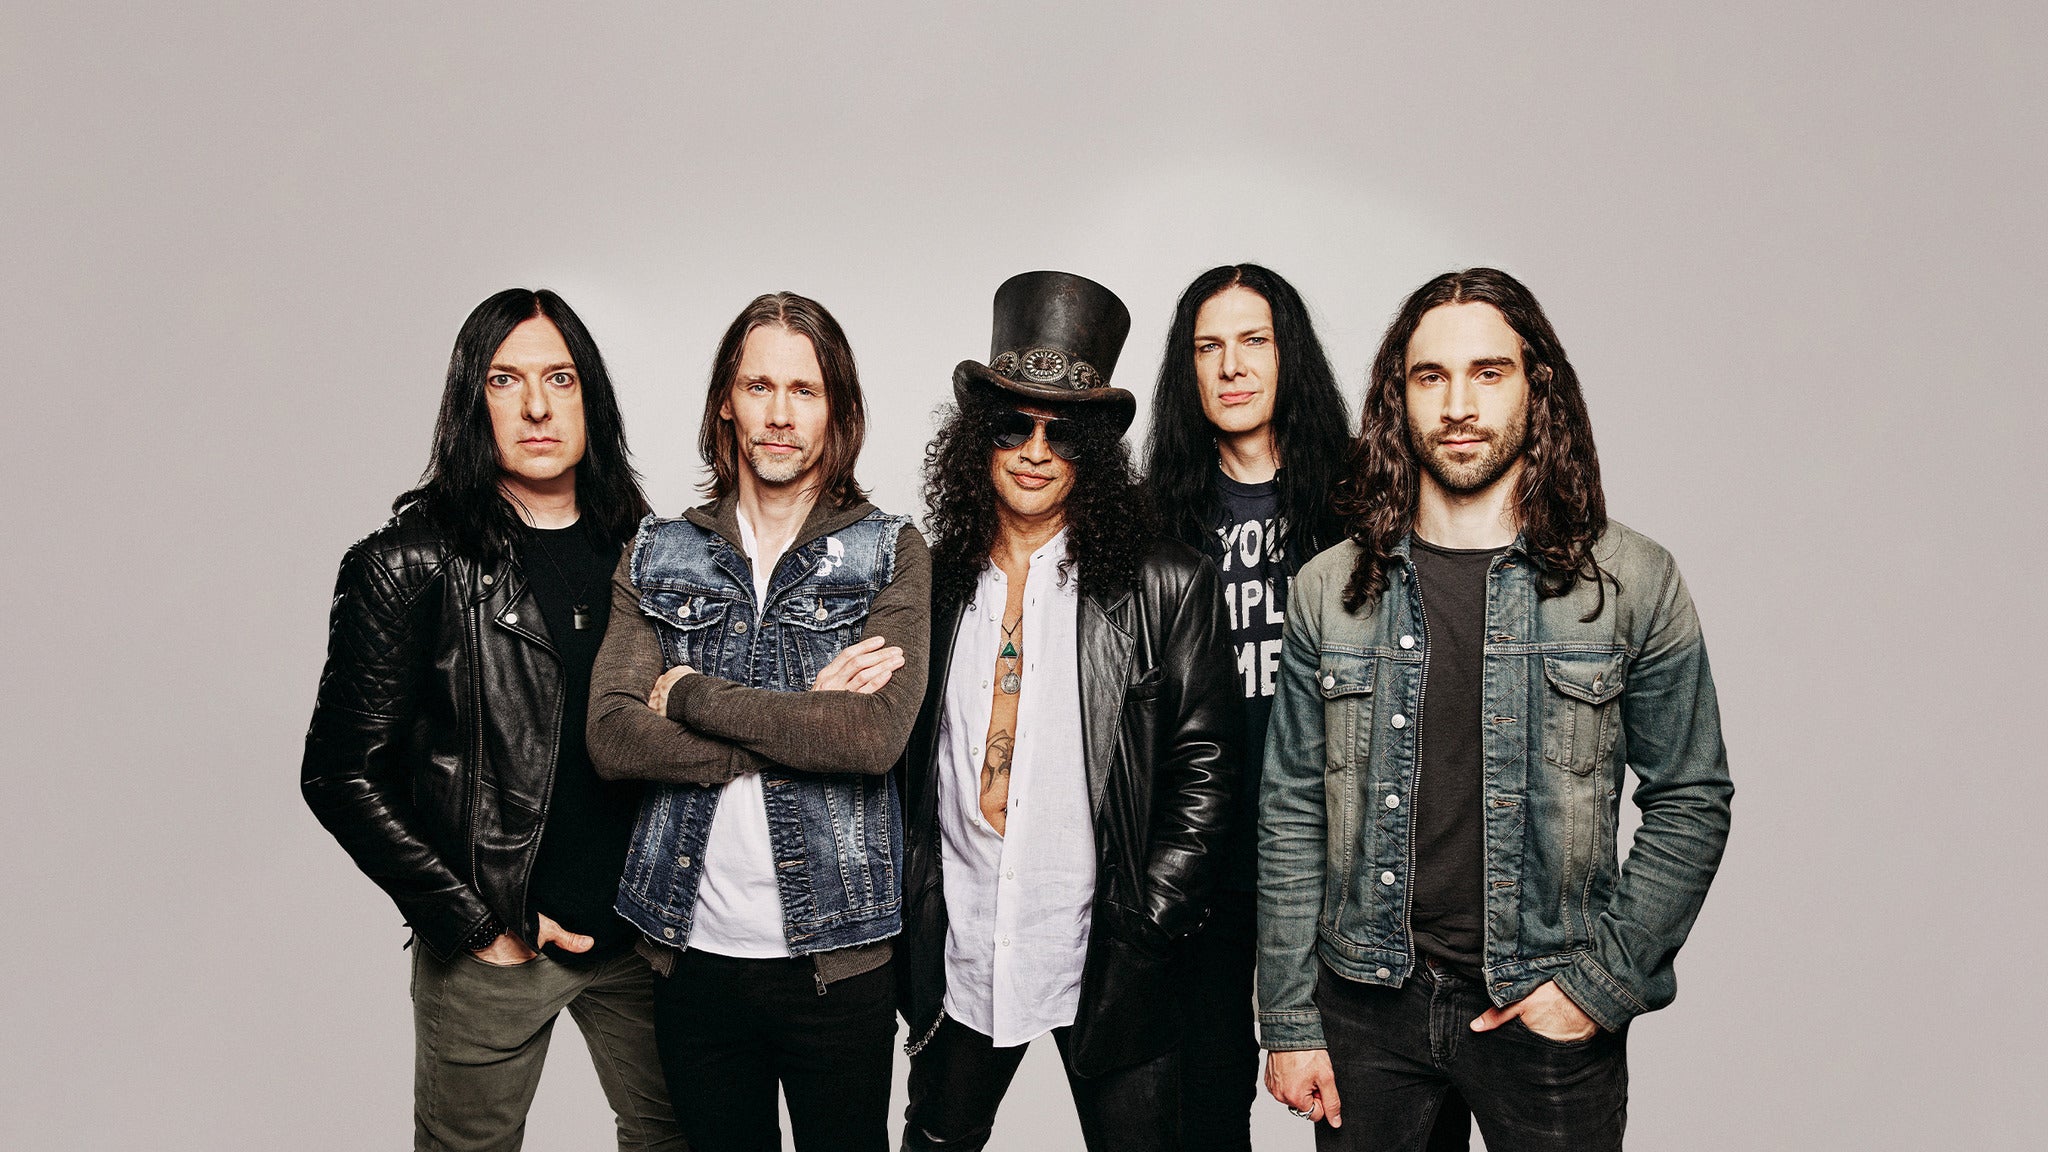 Slash featuring Myles Kennedy and The Conspirators in Nashville promo photo for Fanclub presale offer code